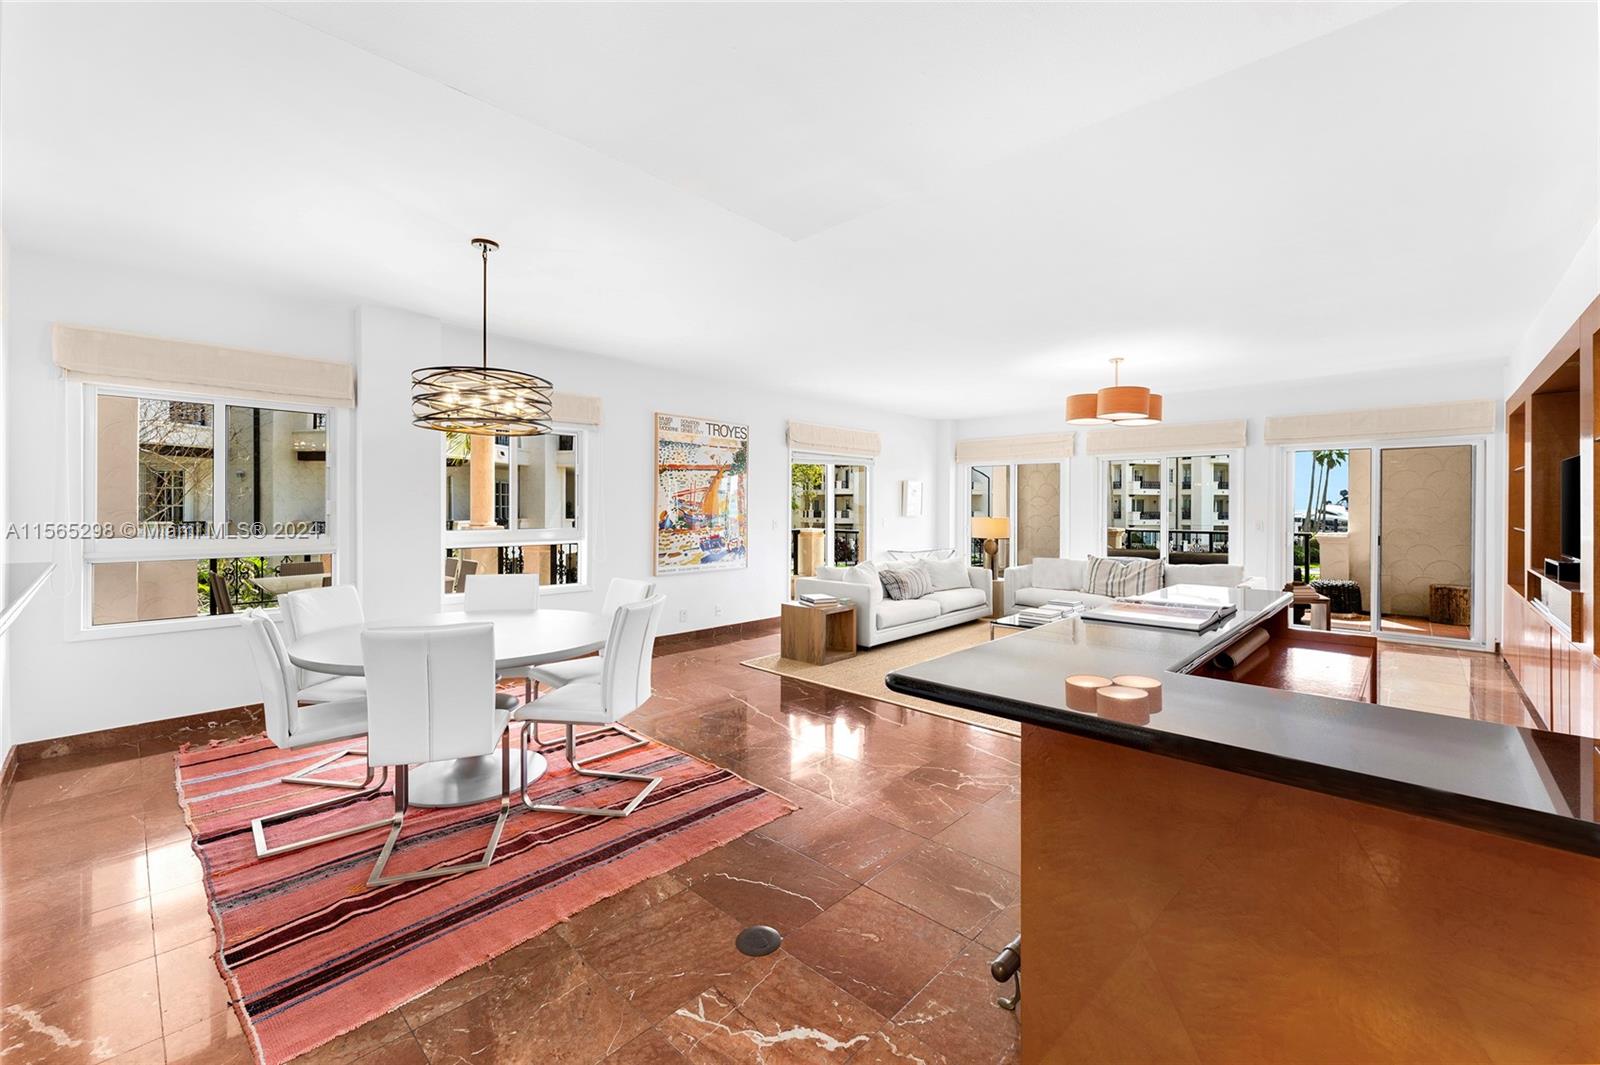 Listing Image 2221 Fisher Island Dr #3201